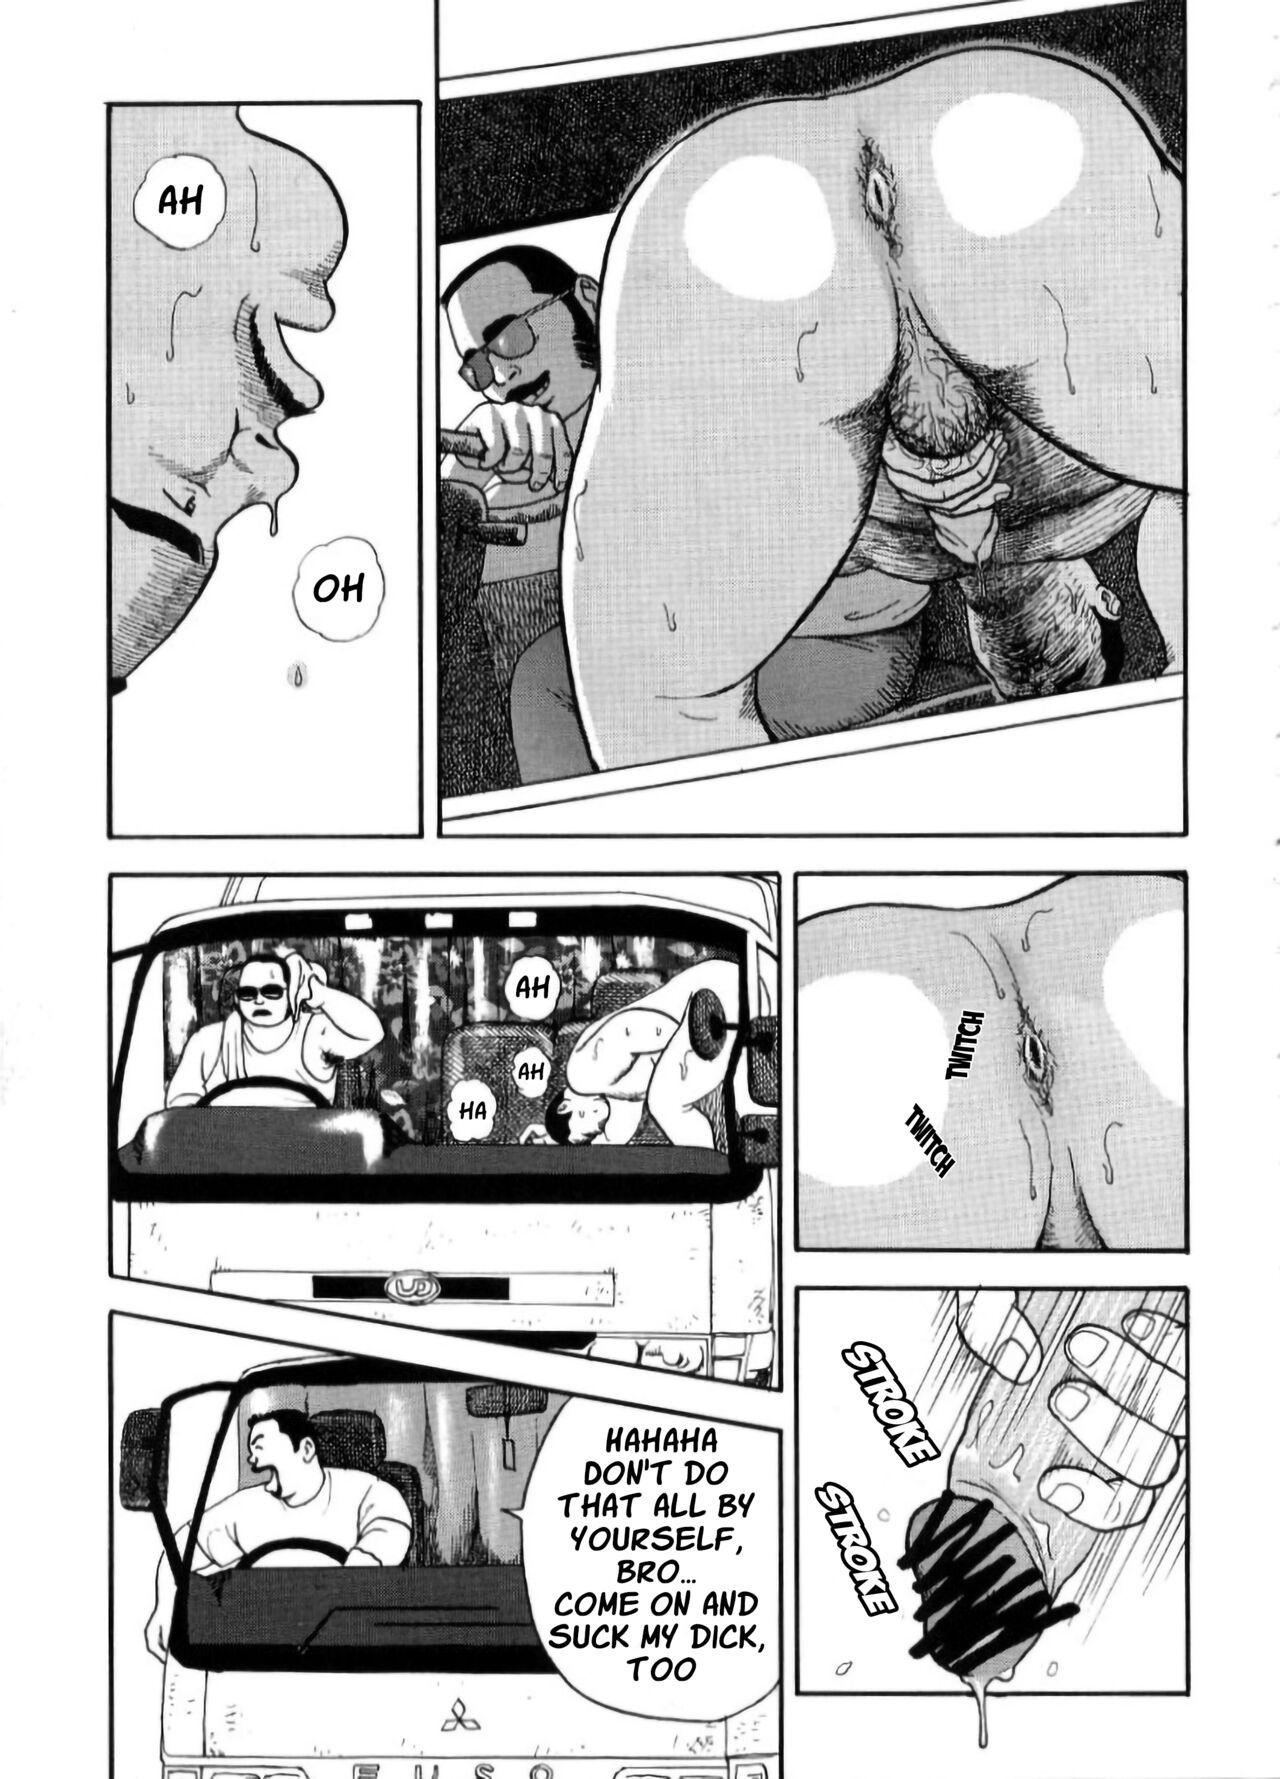 Blowing I Like You - Man in the Passenger Seat Morocha - Page 5